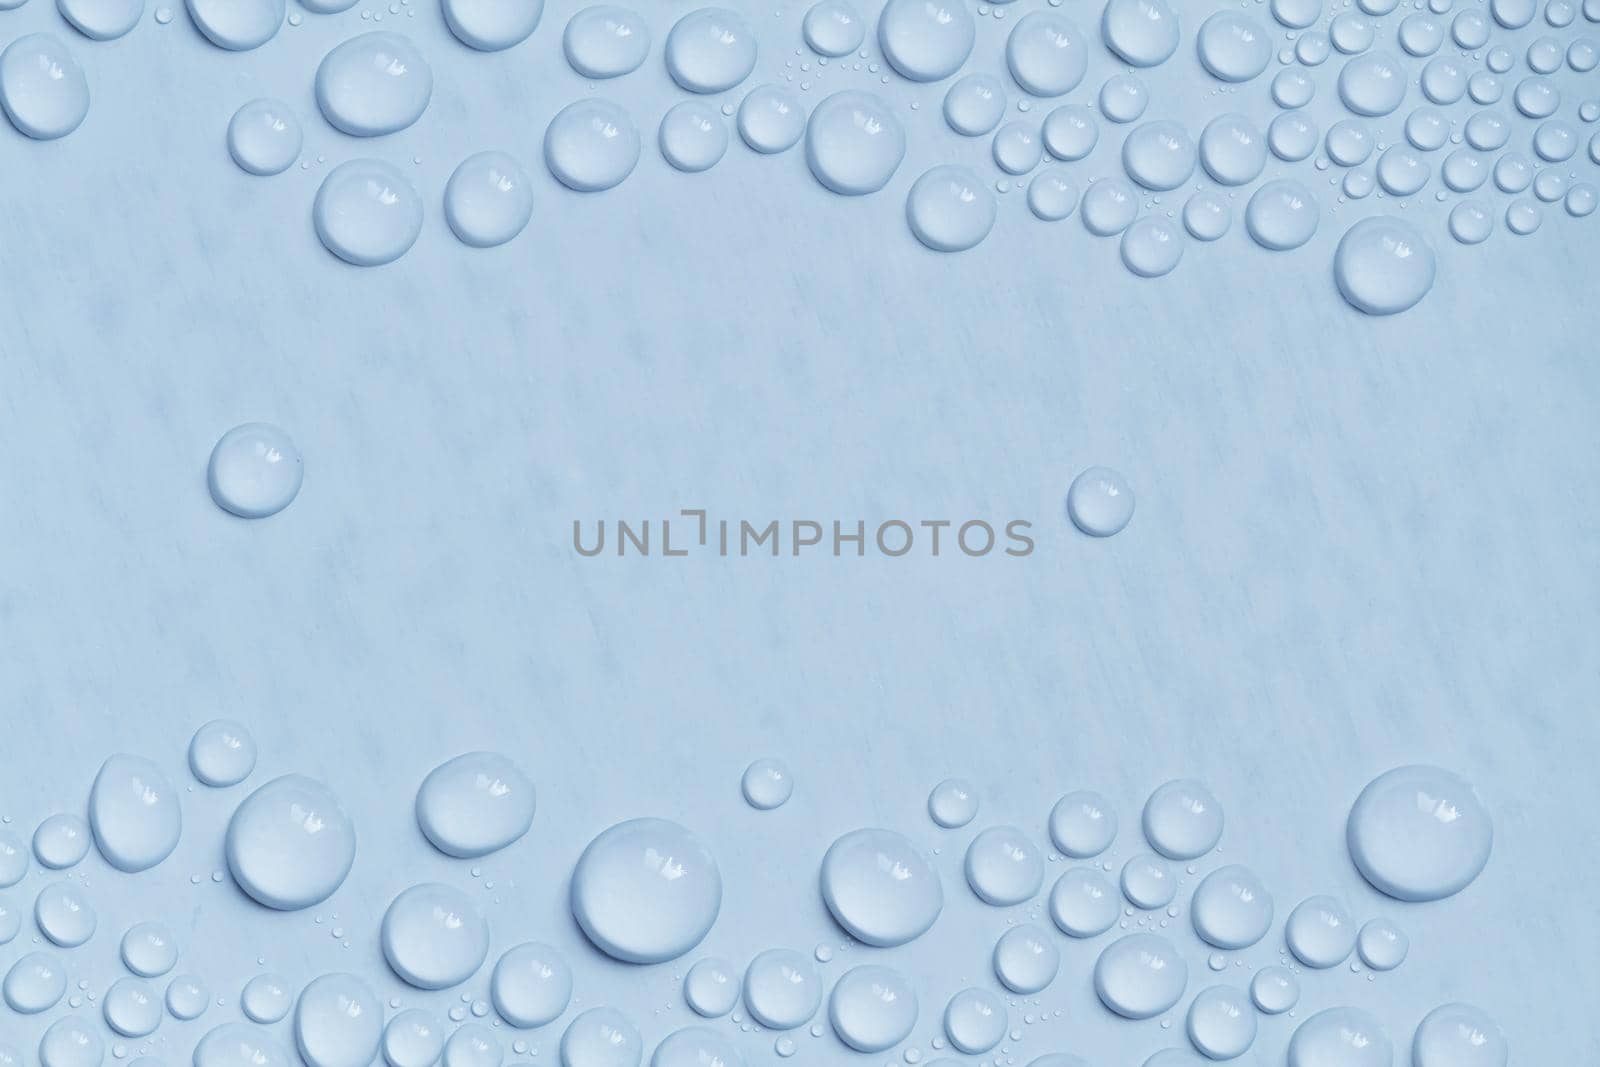 Big and small water drops on blue background. Closeup.